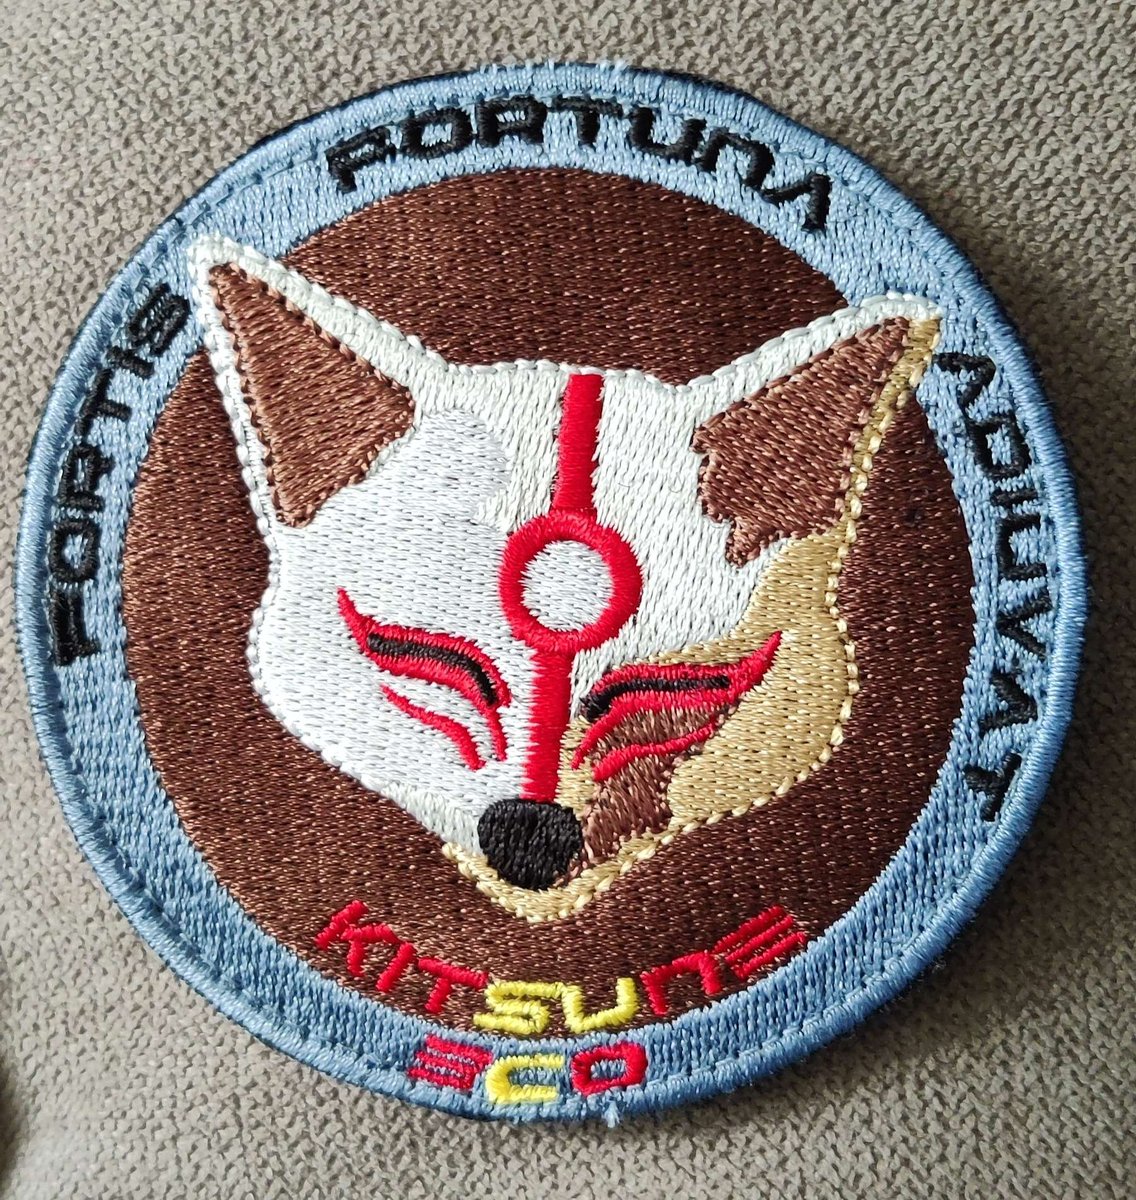 #StarCitizen @CaptainZyloh, do you remember a long time ago that I was going to give you a patch to add to your collection and you told me: when we met at a Citizen Bar. Mission accomplished, thank you for everything, it was a great night. @BarCitizenESP